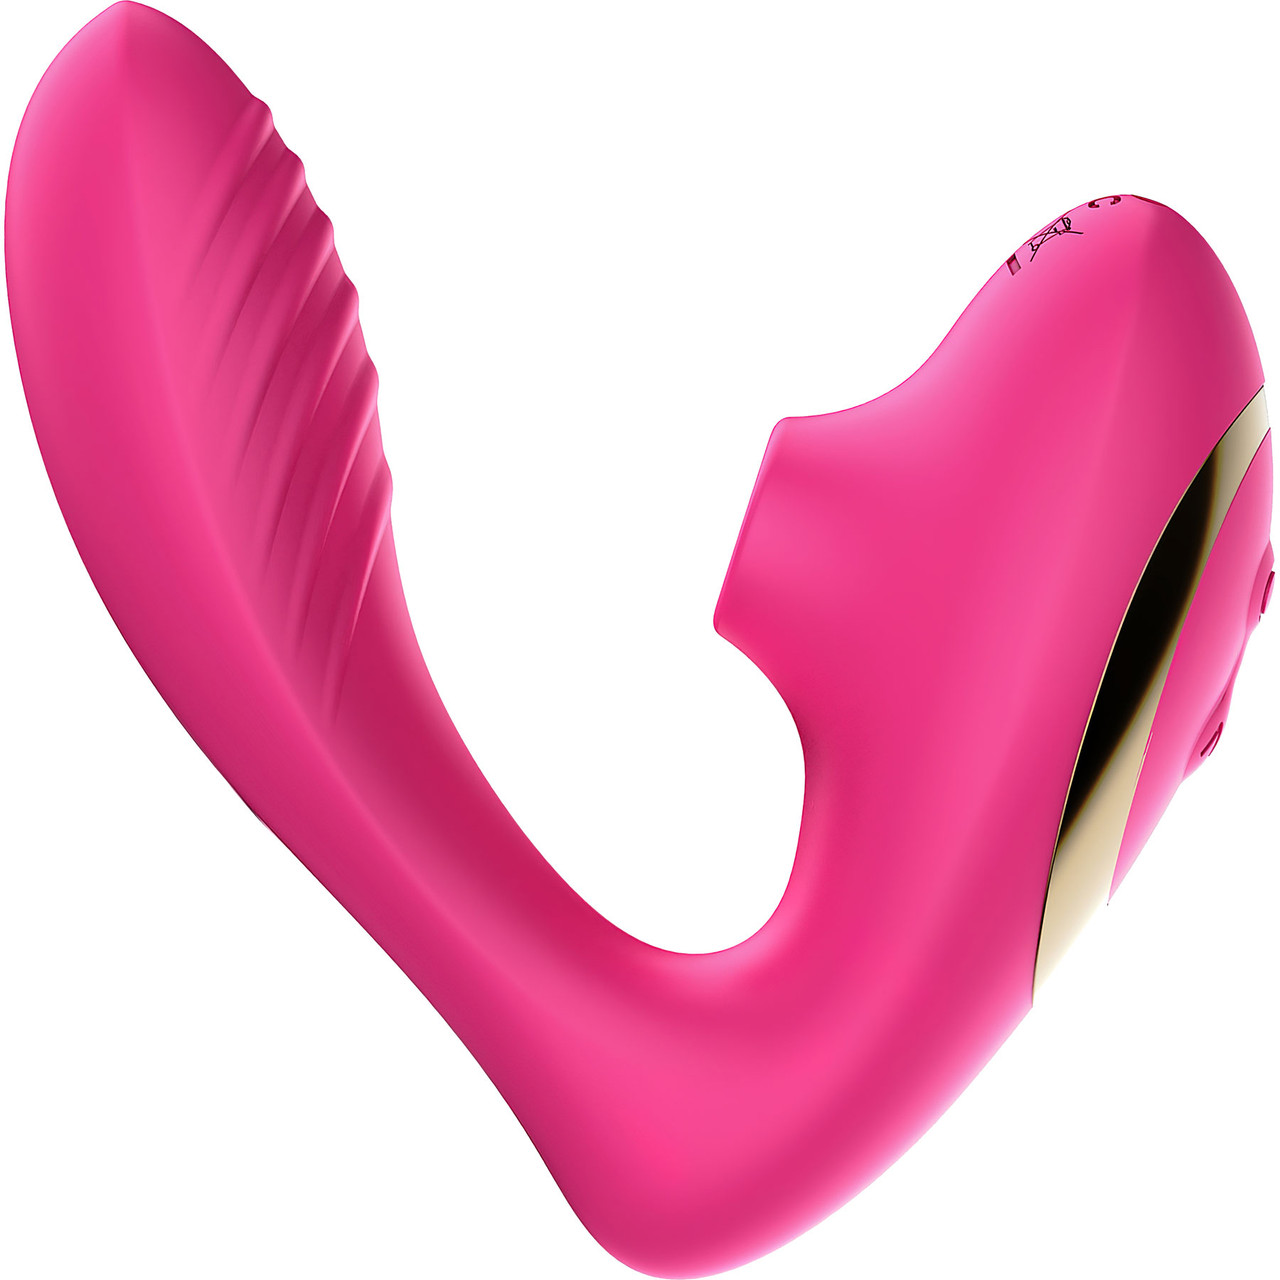 Tracy's Dog OG PRO Clitoral Sucking Vibrator With Pleasure Air, G-Spot  Vibration & Remote - Light Pink, Silicone, Rechargeable